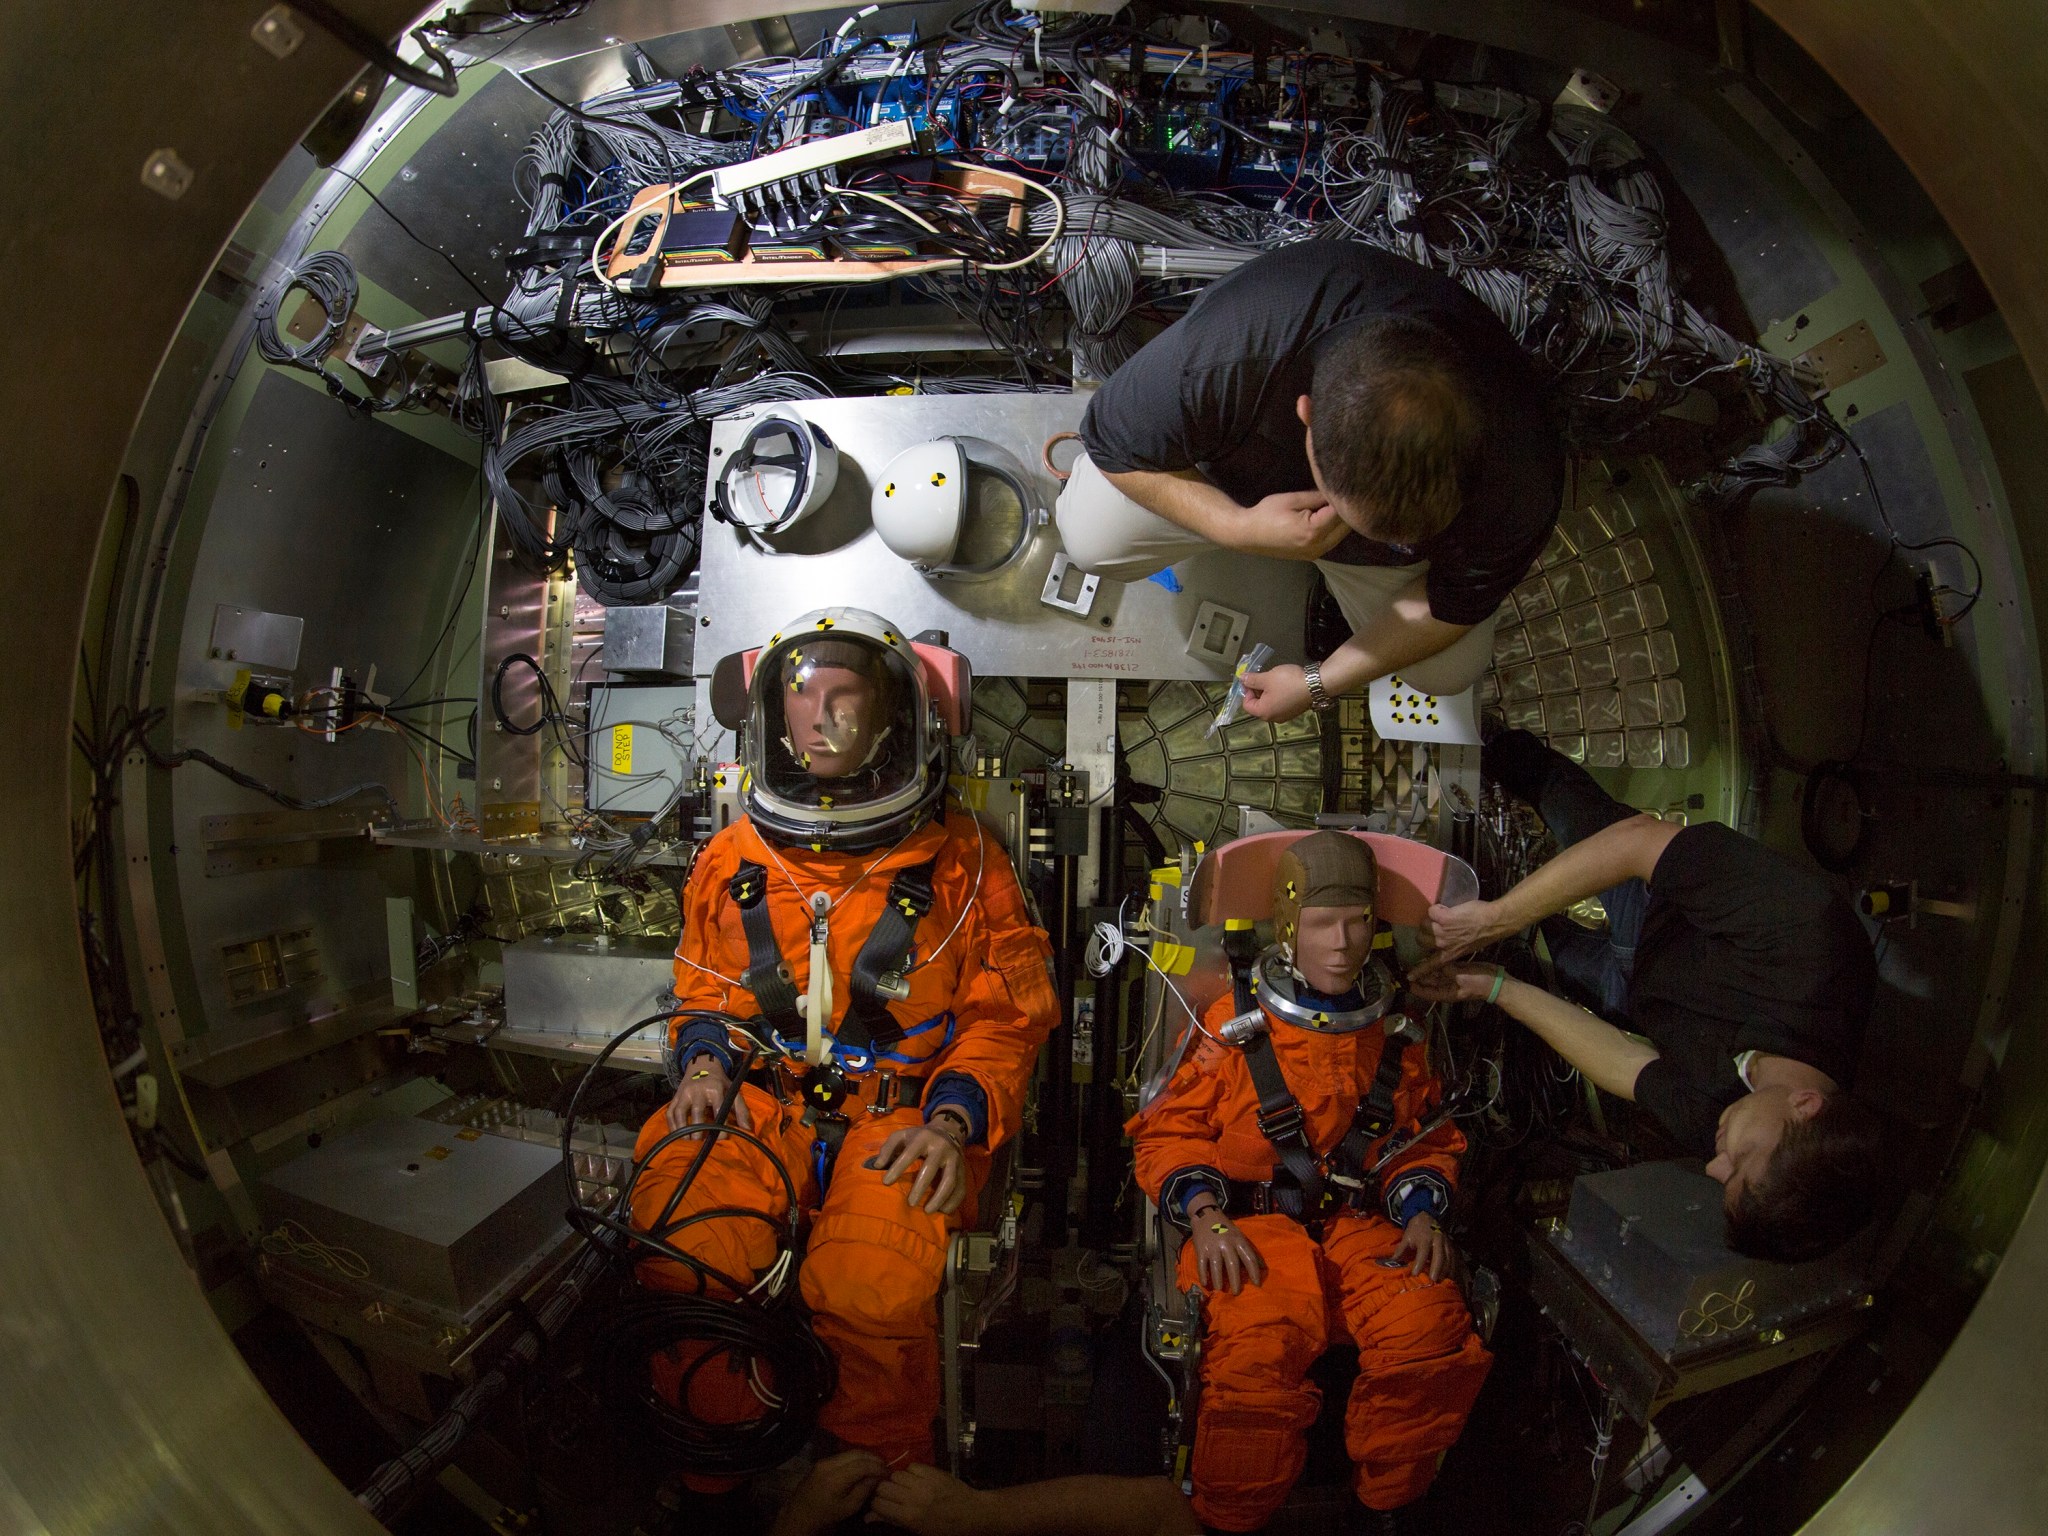 Two dummies in orange spacesuits are situated in chairs in a mockup.